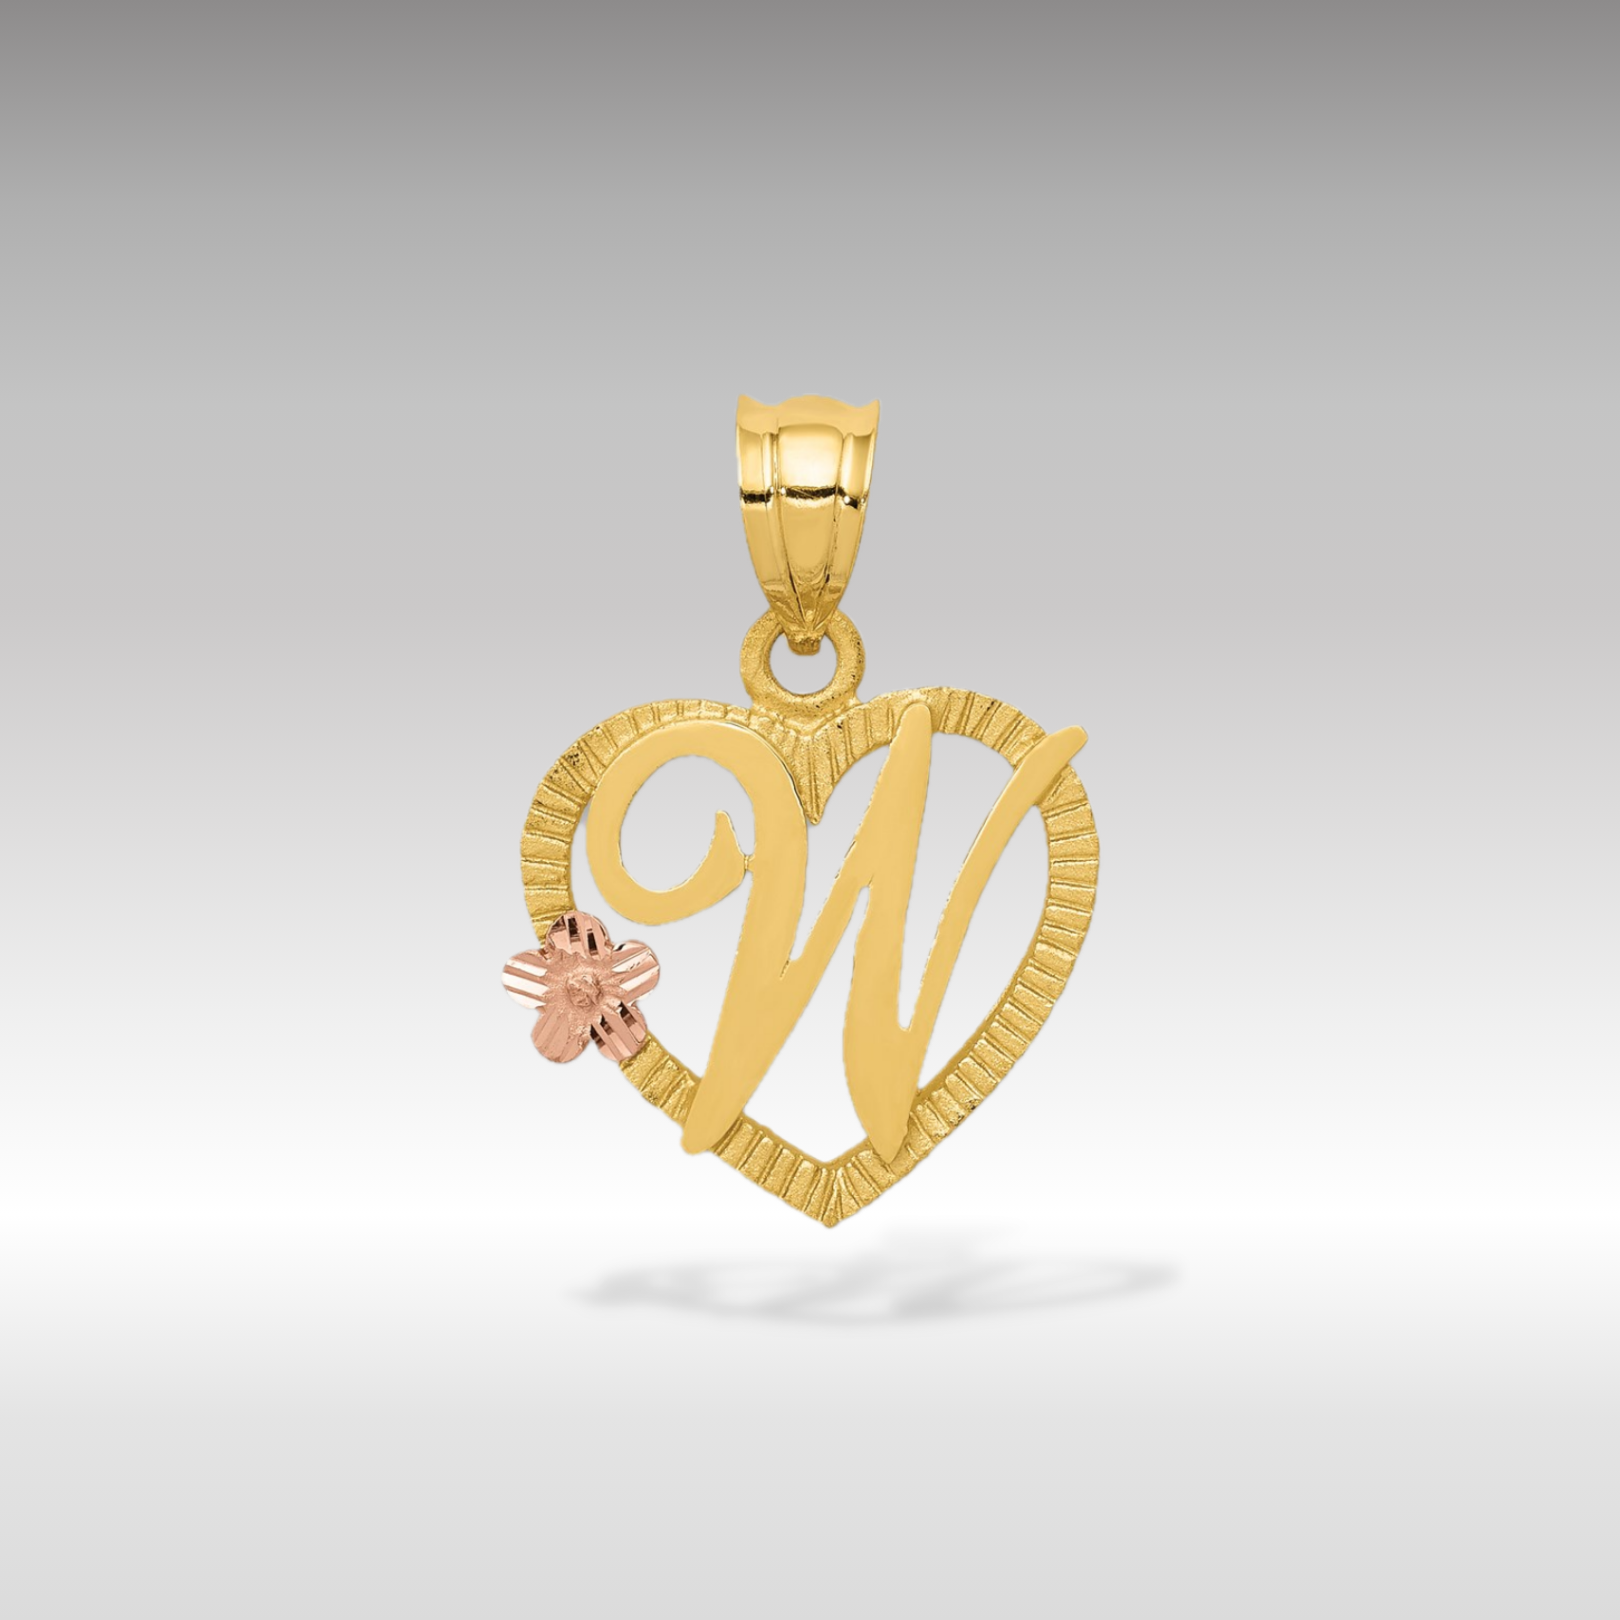 14K Gold Script Letter 'W' Heart Charm with Floral Accent - Charlie & Co. Jewelry